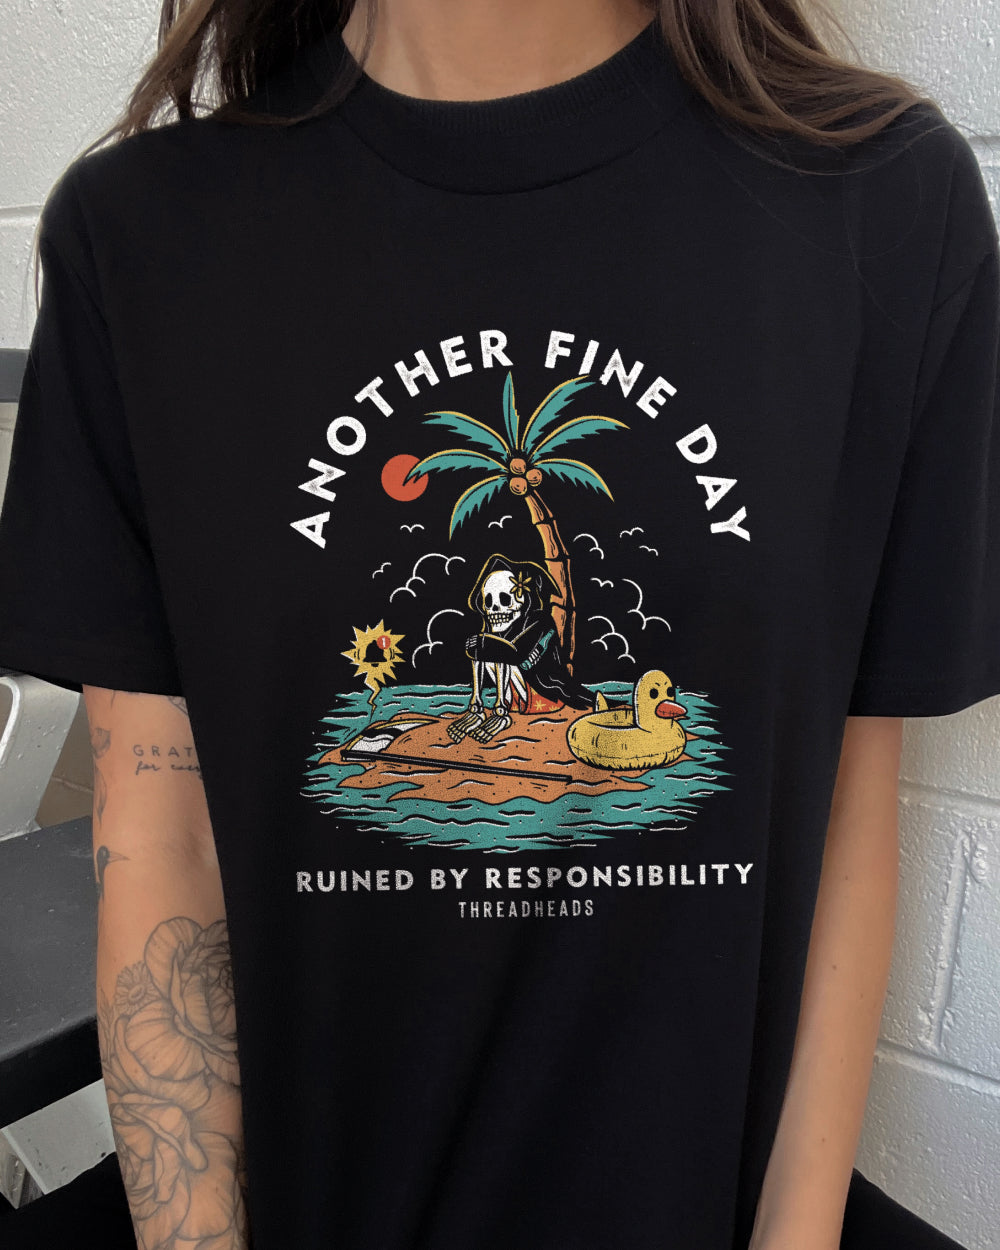 Another Fine Day Ruined by Responsibility T-Shirt